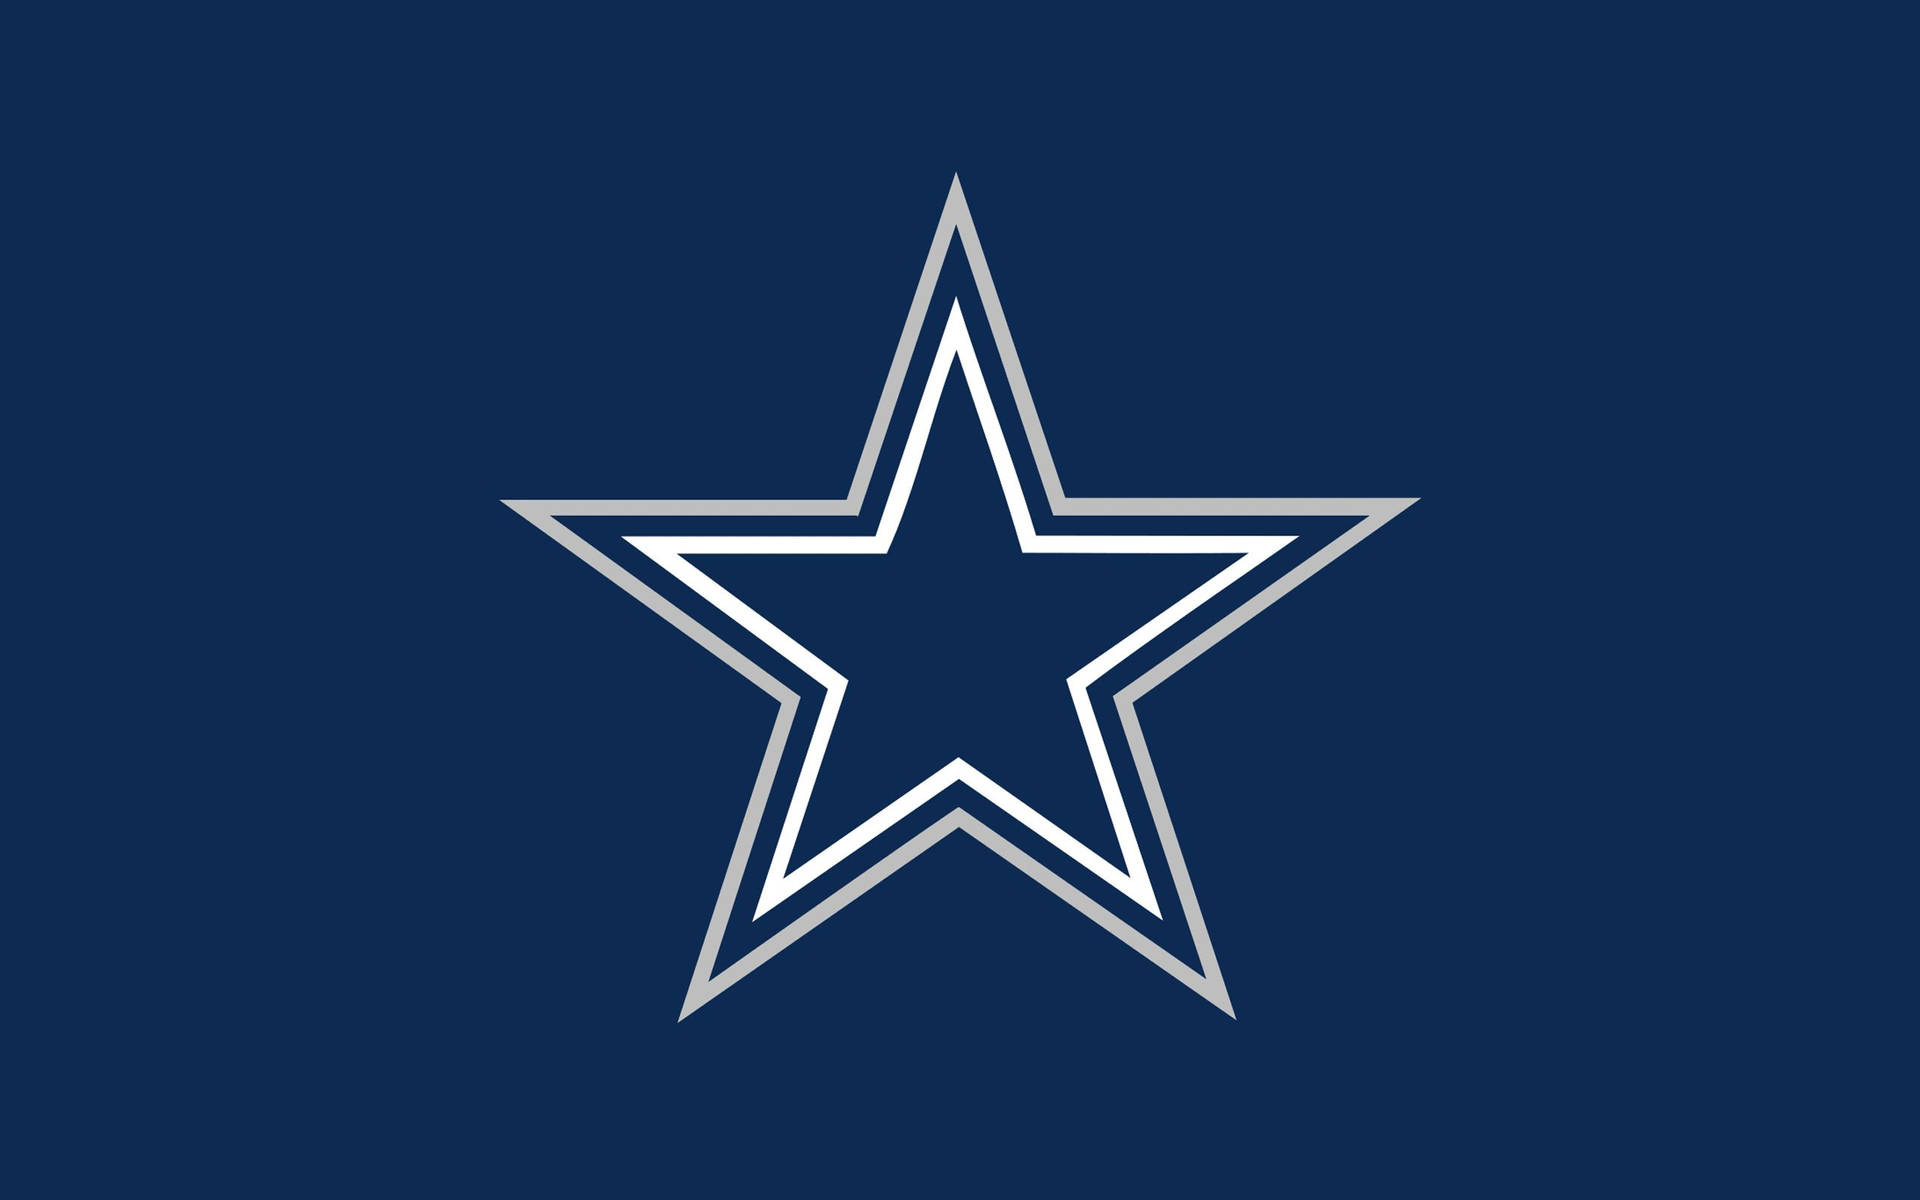 Show your team spirit with the Dallas Cowboys Wallpaper